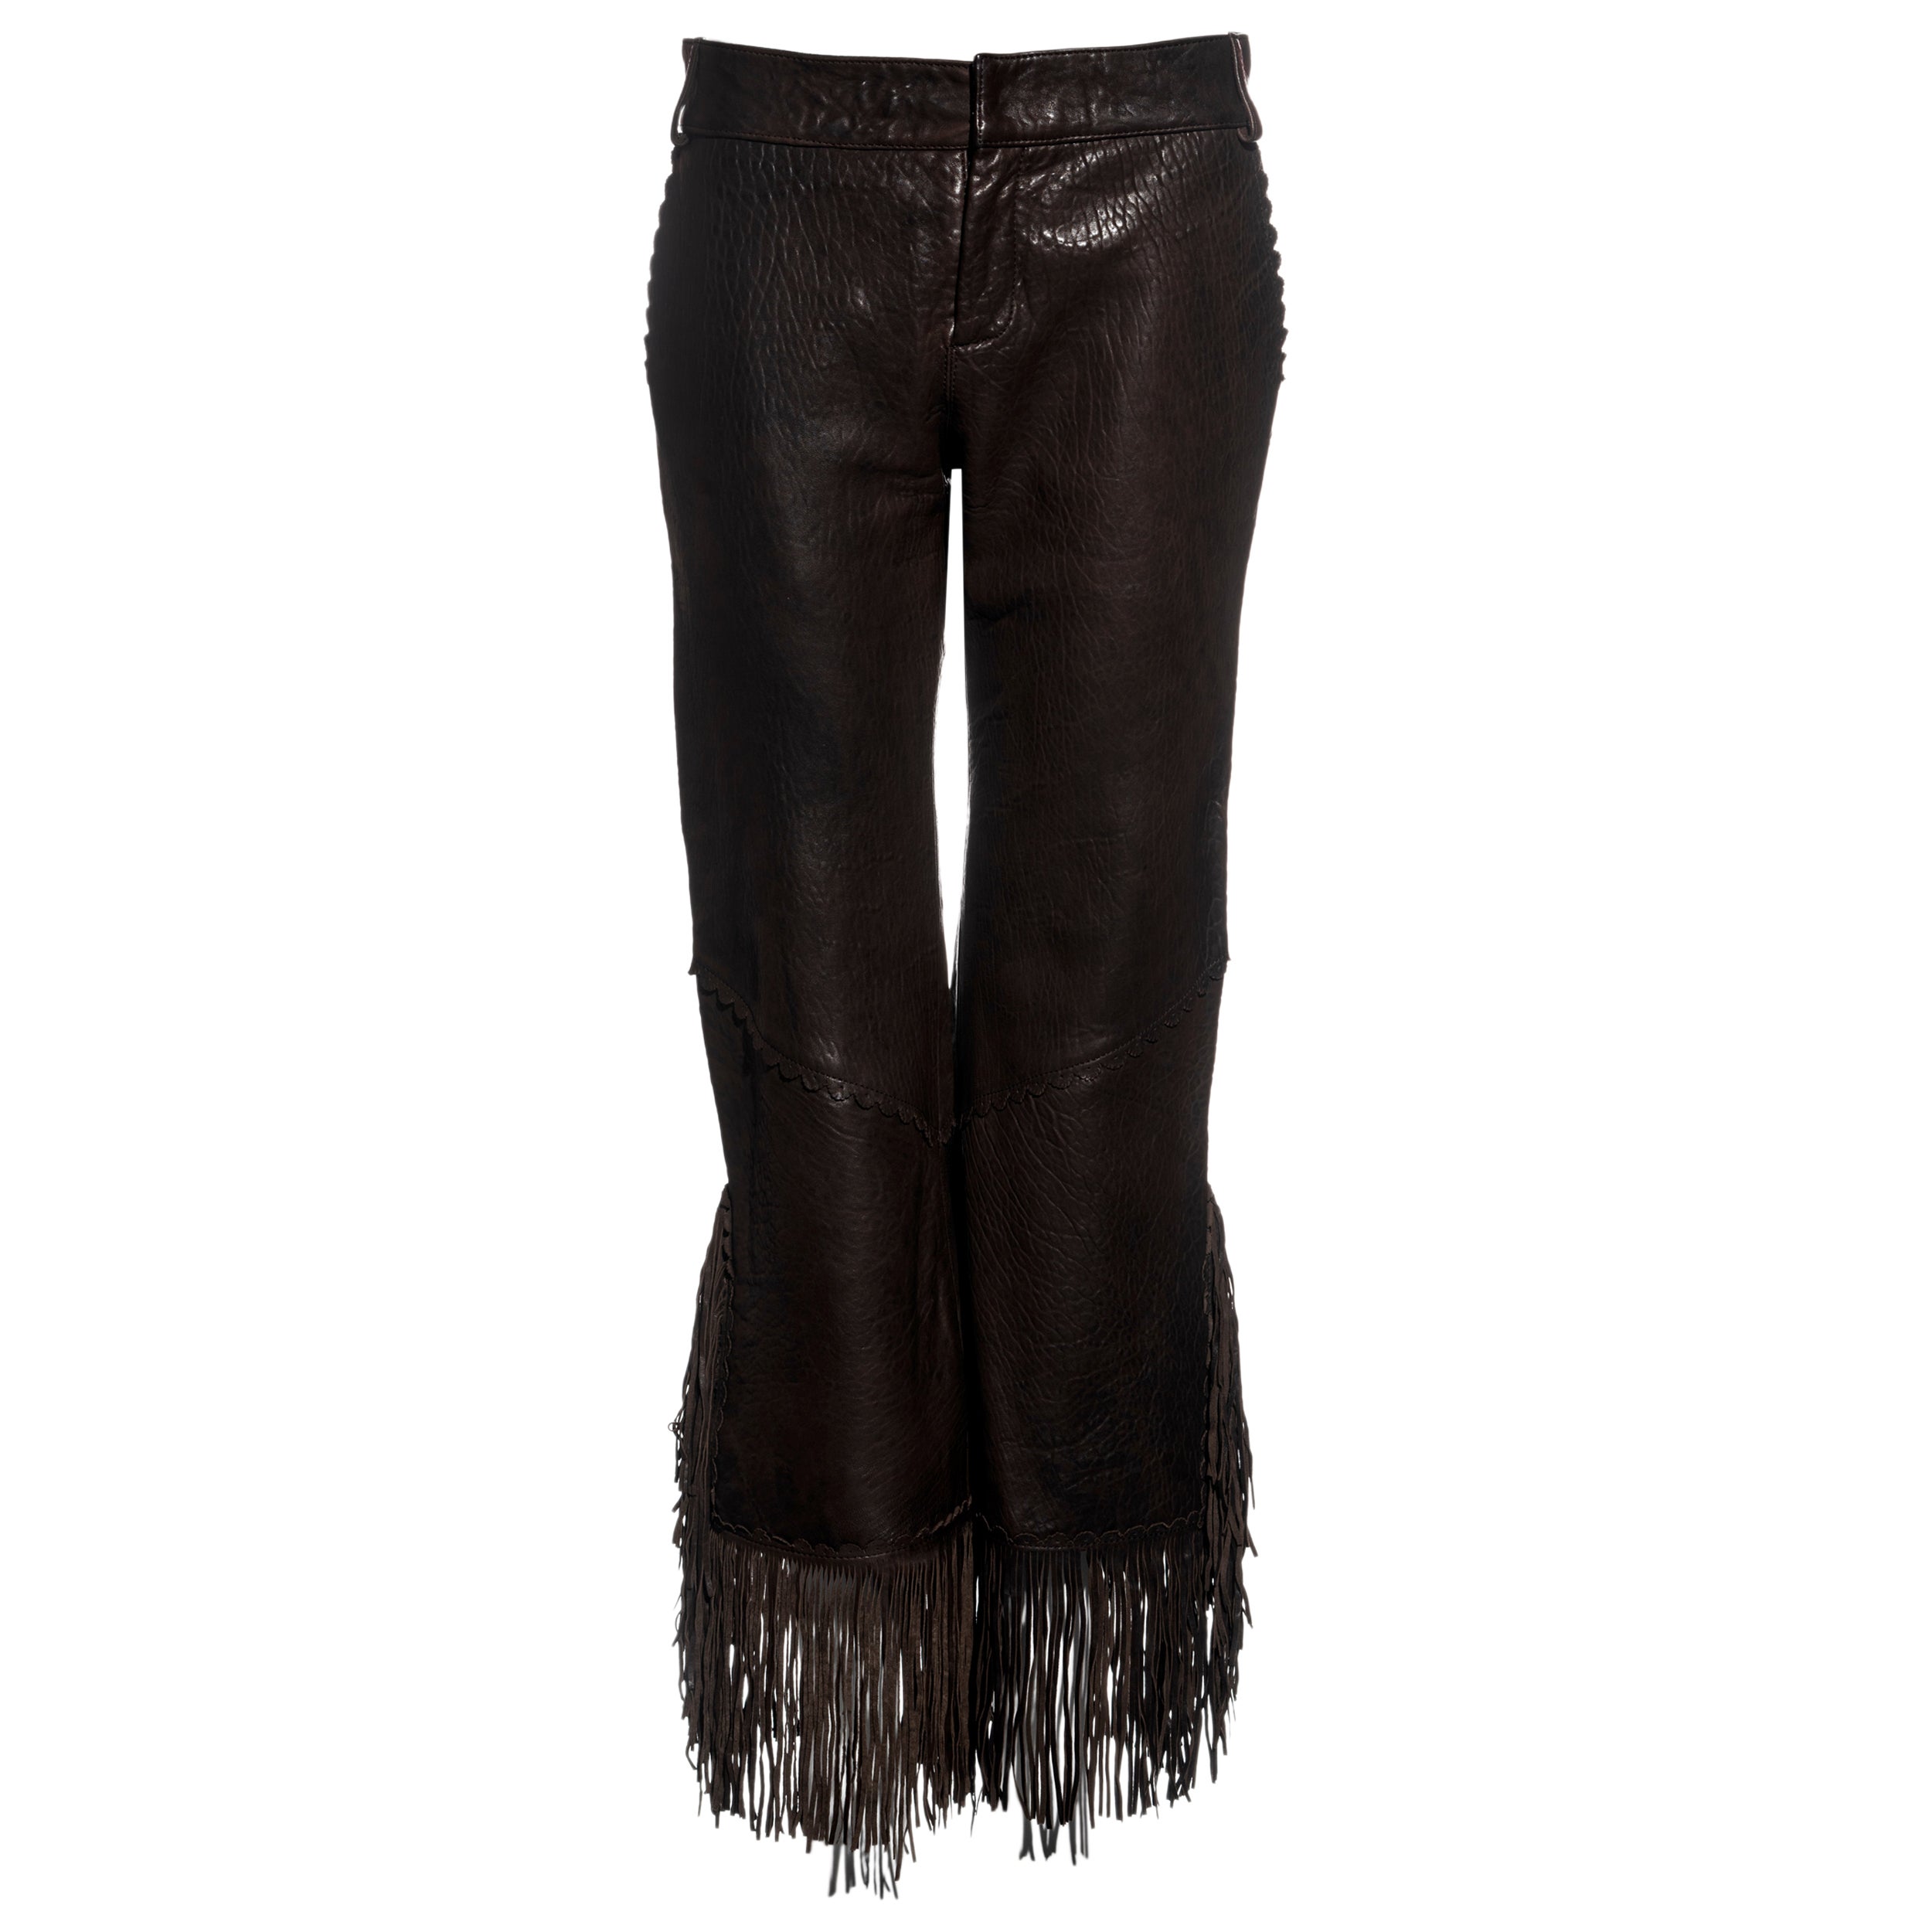 Jean Paul Gaultier brown leather pants with fringe pants, c. 2000 For Sale